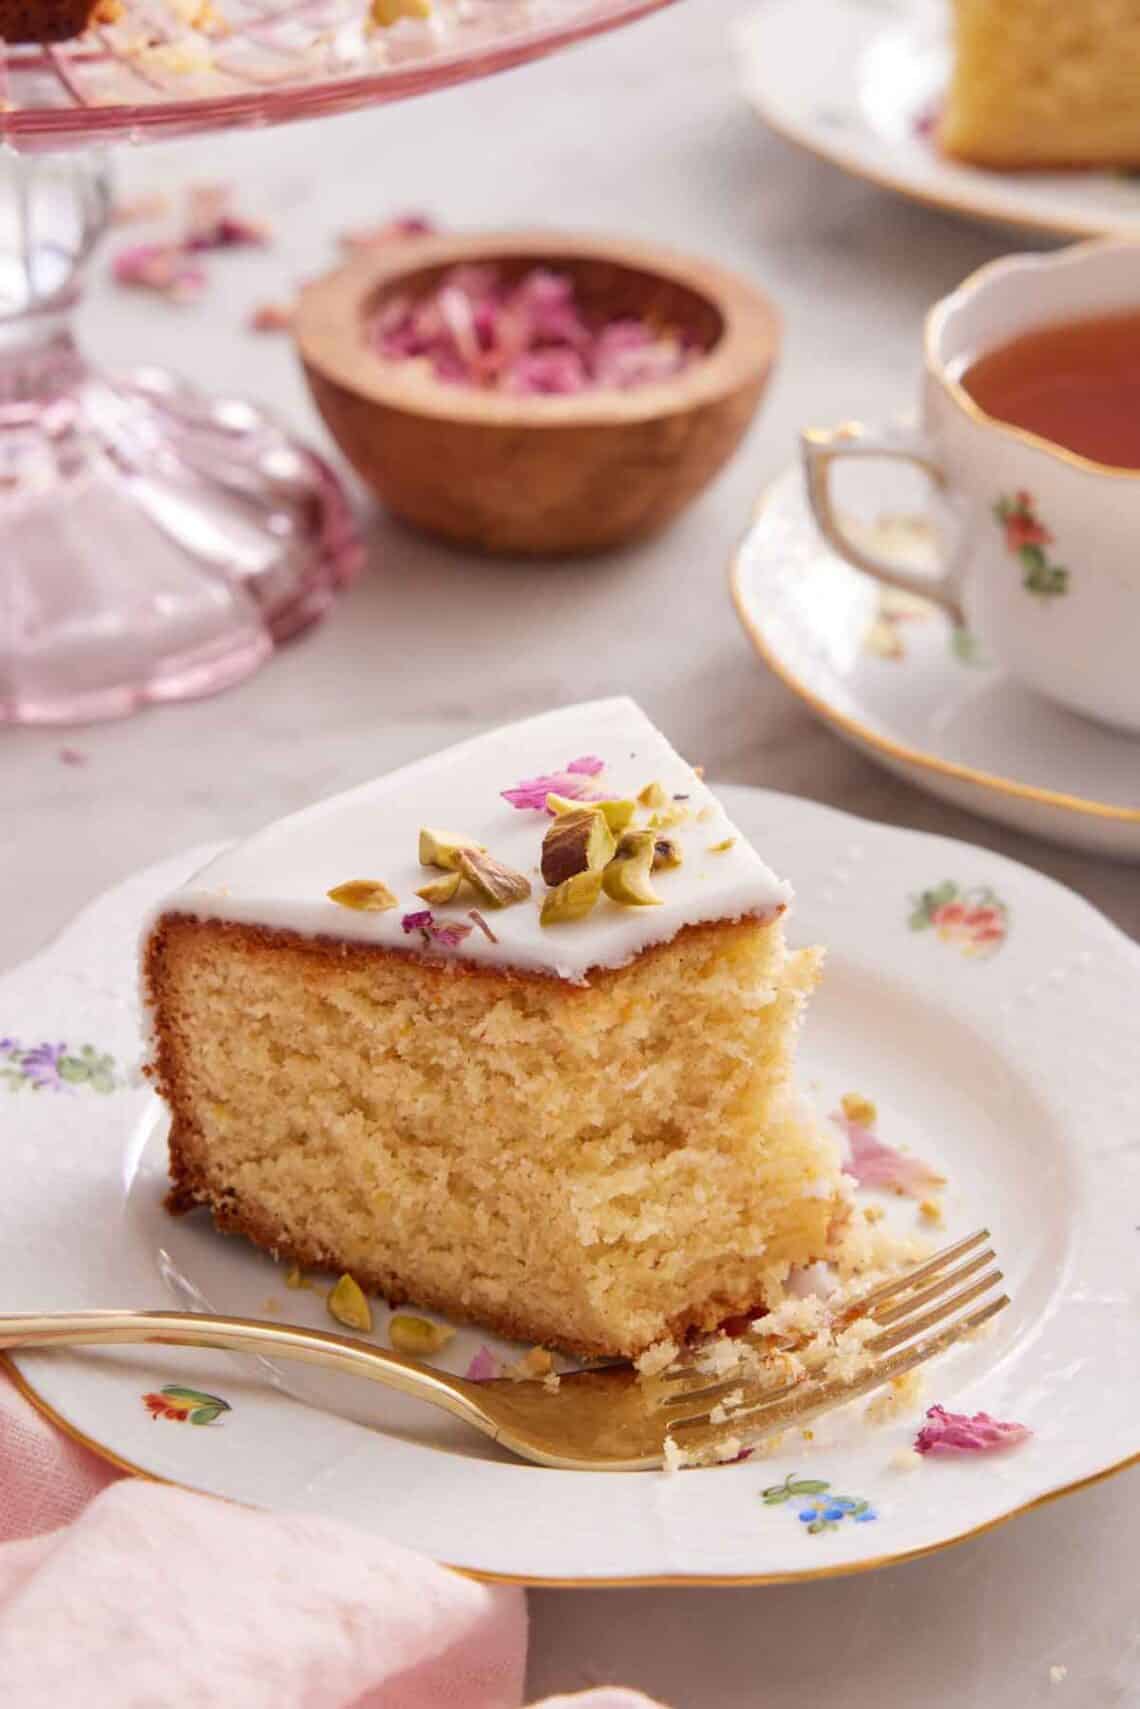 A plate with a slice of Persian love cake with half of it eaten and a fork on the plate.